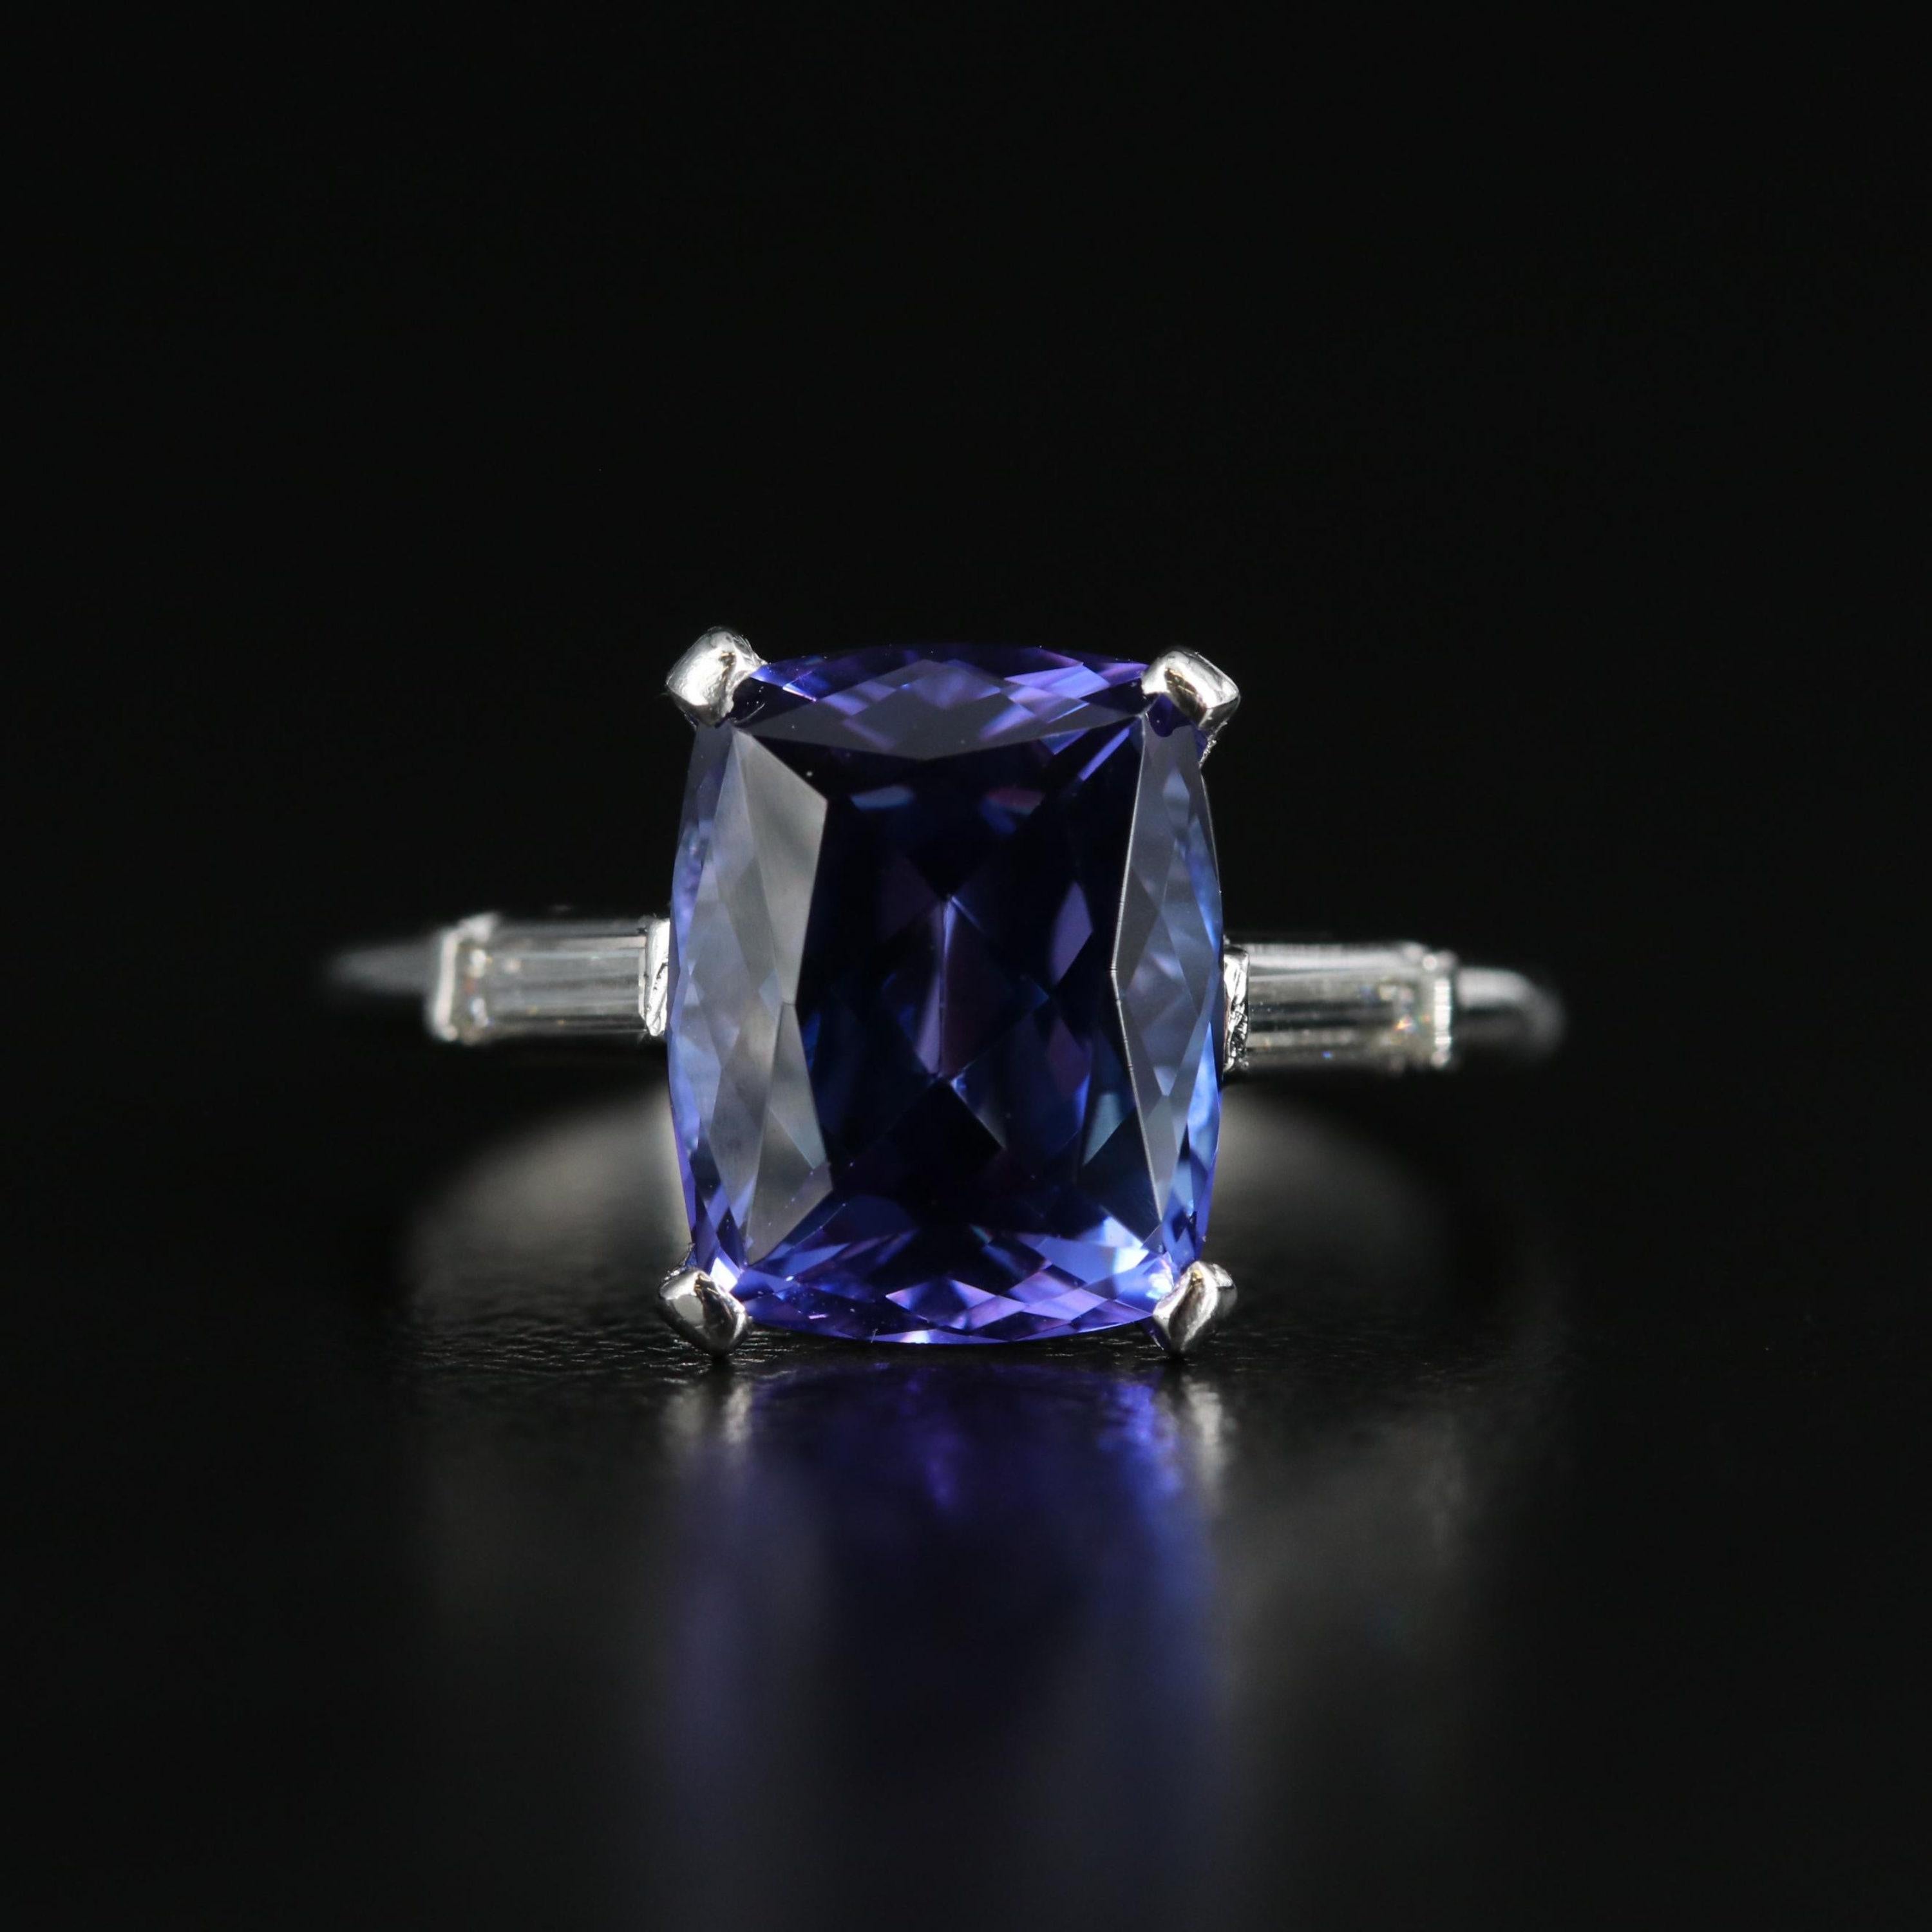 For Sale:  Antique 3.56 Carat Natural Tanzanite Diamond Engagement Ring in 18K Gold 3